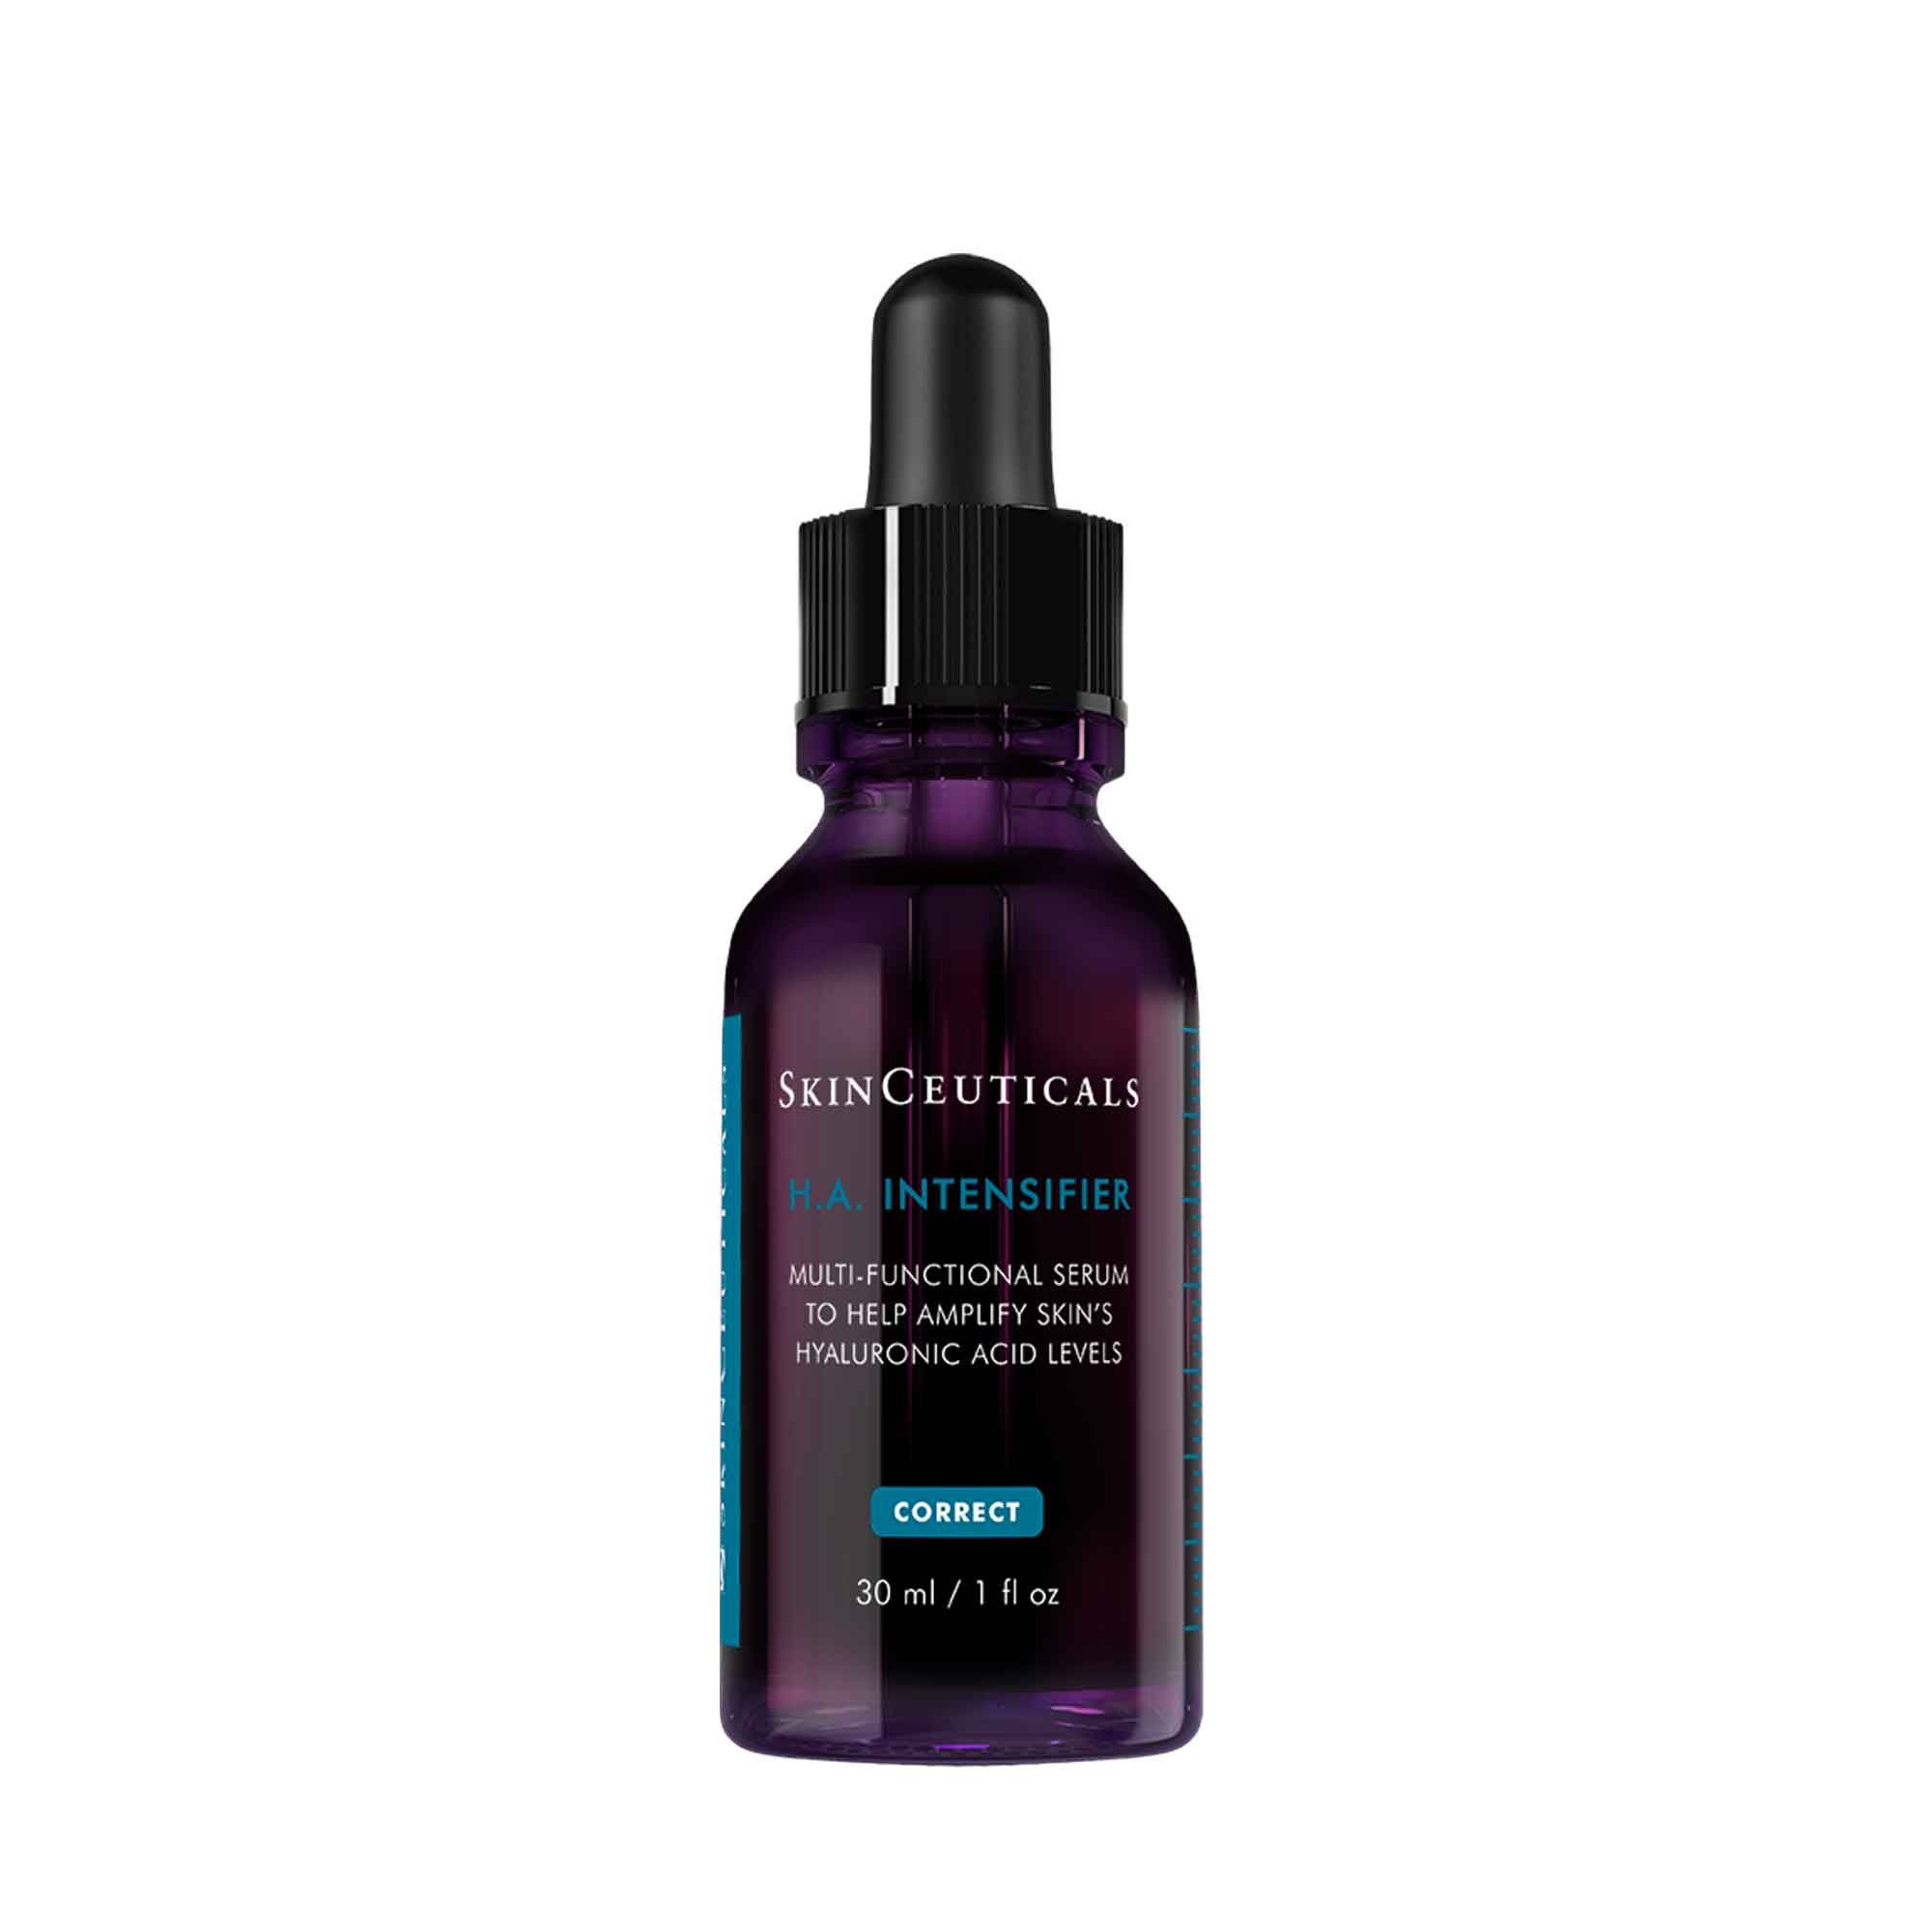 Hyaluronic Acid Intensifier (H.A.) | SkinCeuticals